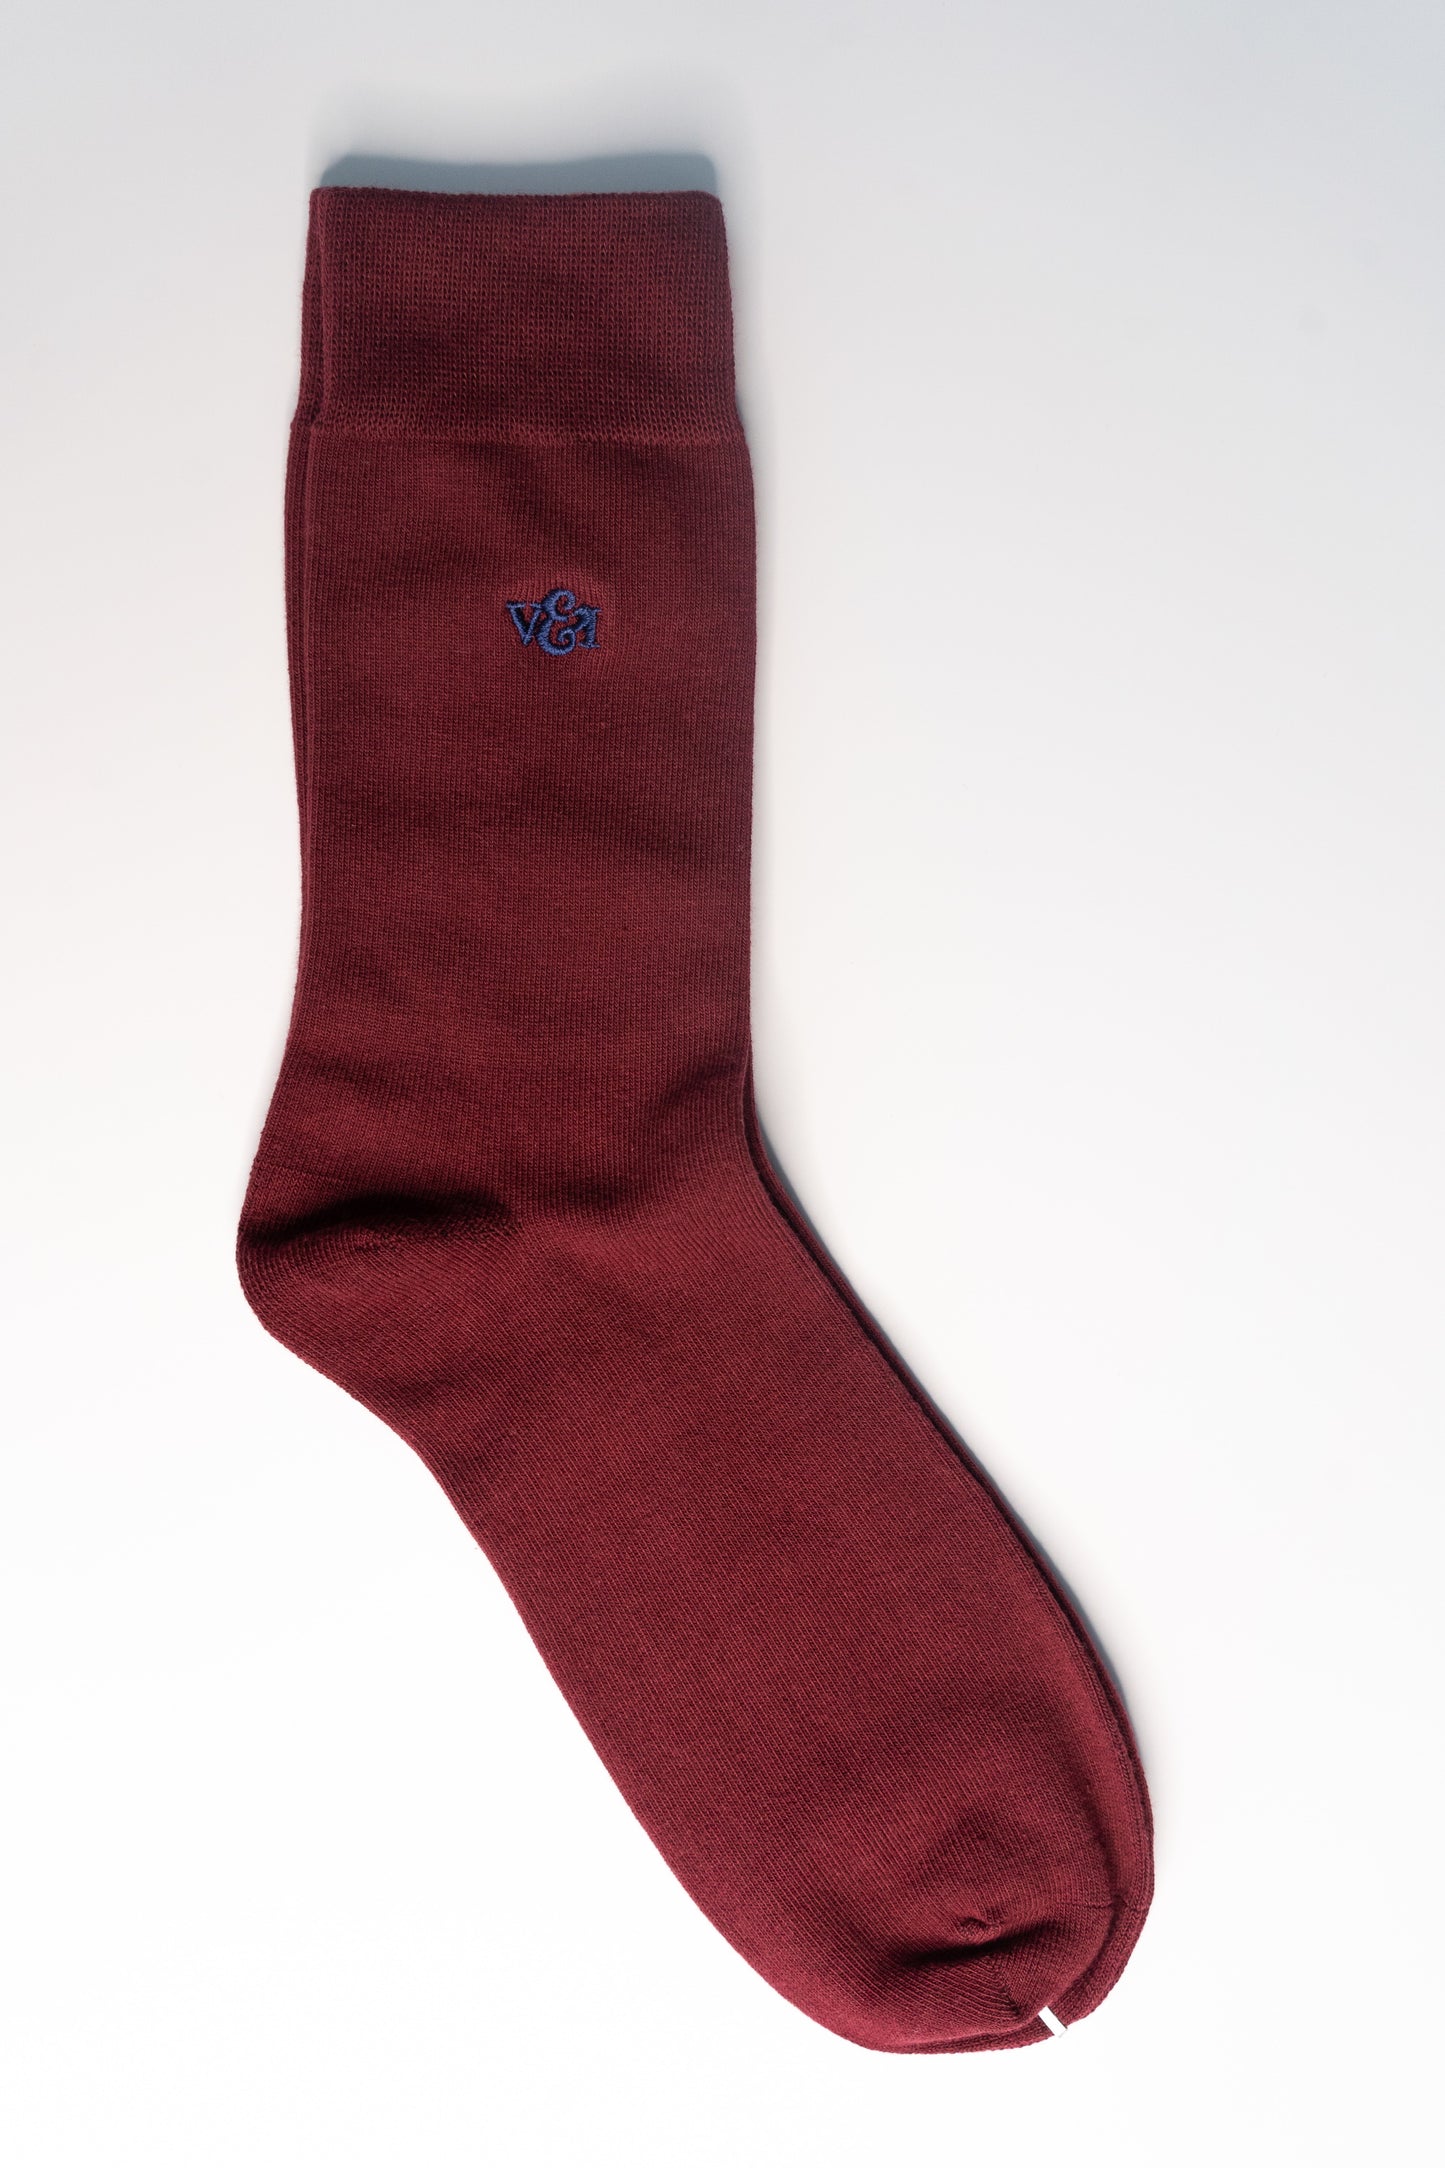 Burgundy Red Knitted Tie Box Set